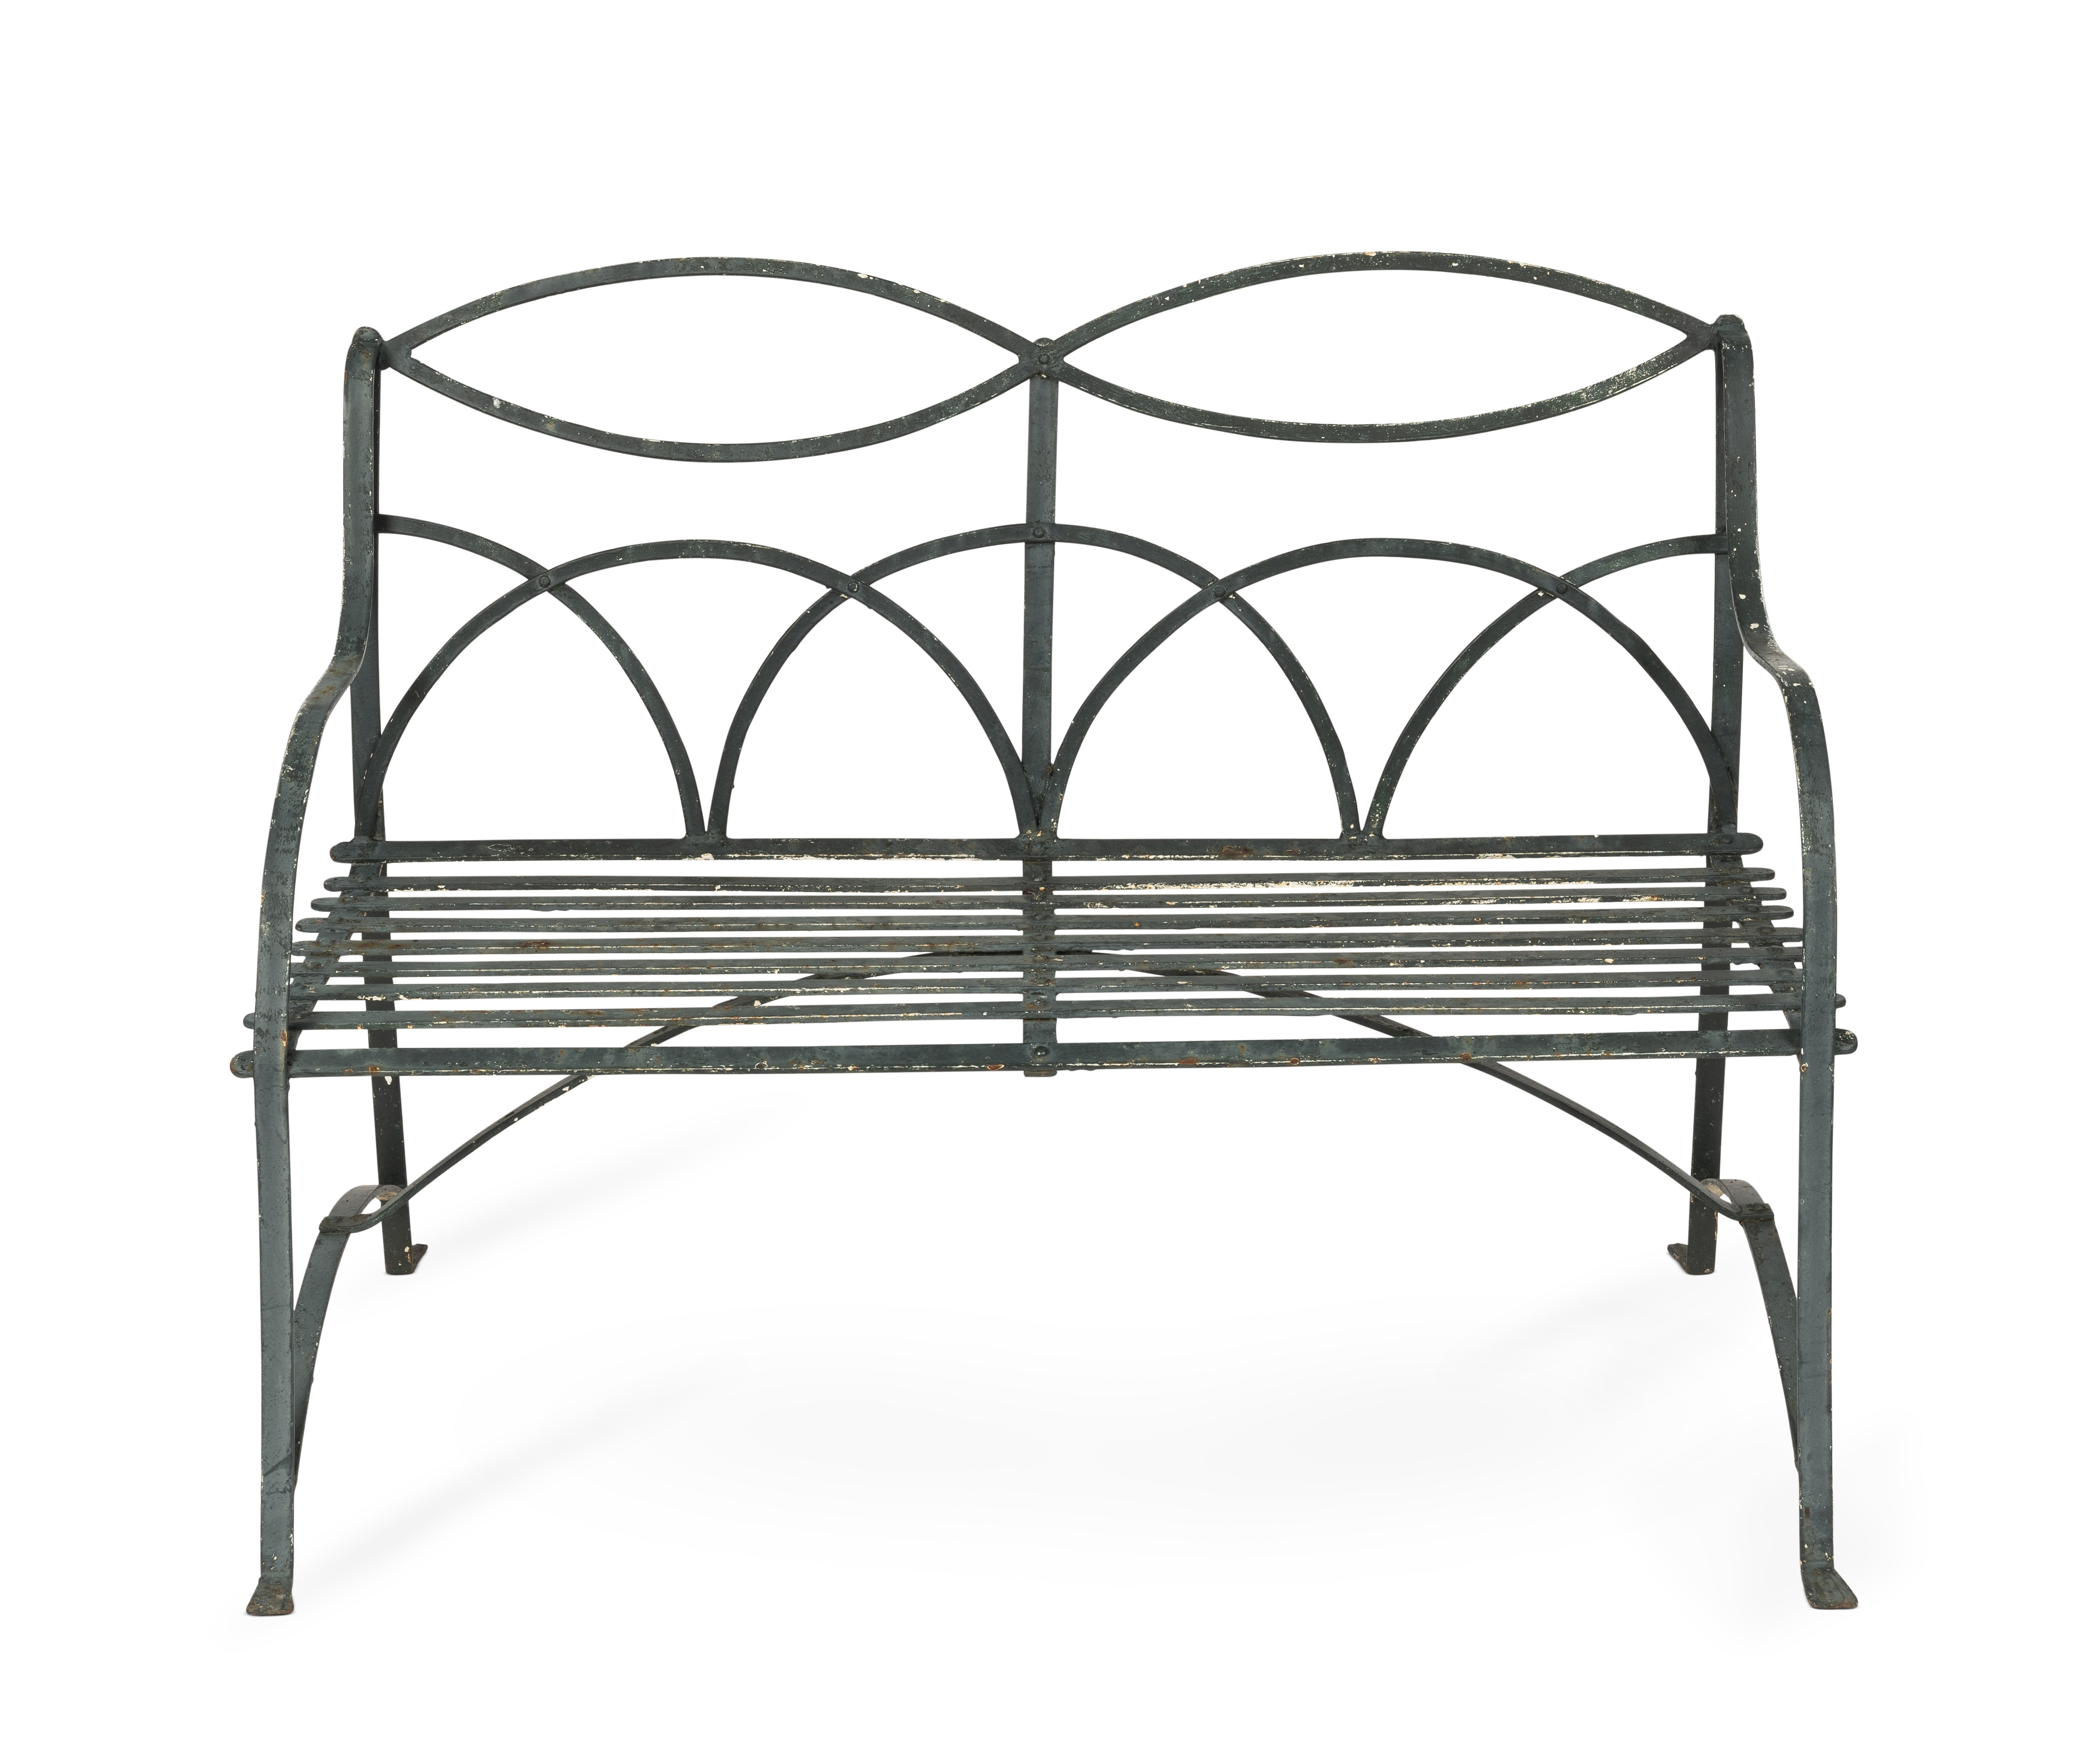 A wrought iron green painted garden seat, together with two matching garden chairs (3)